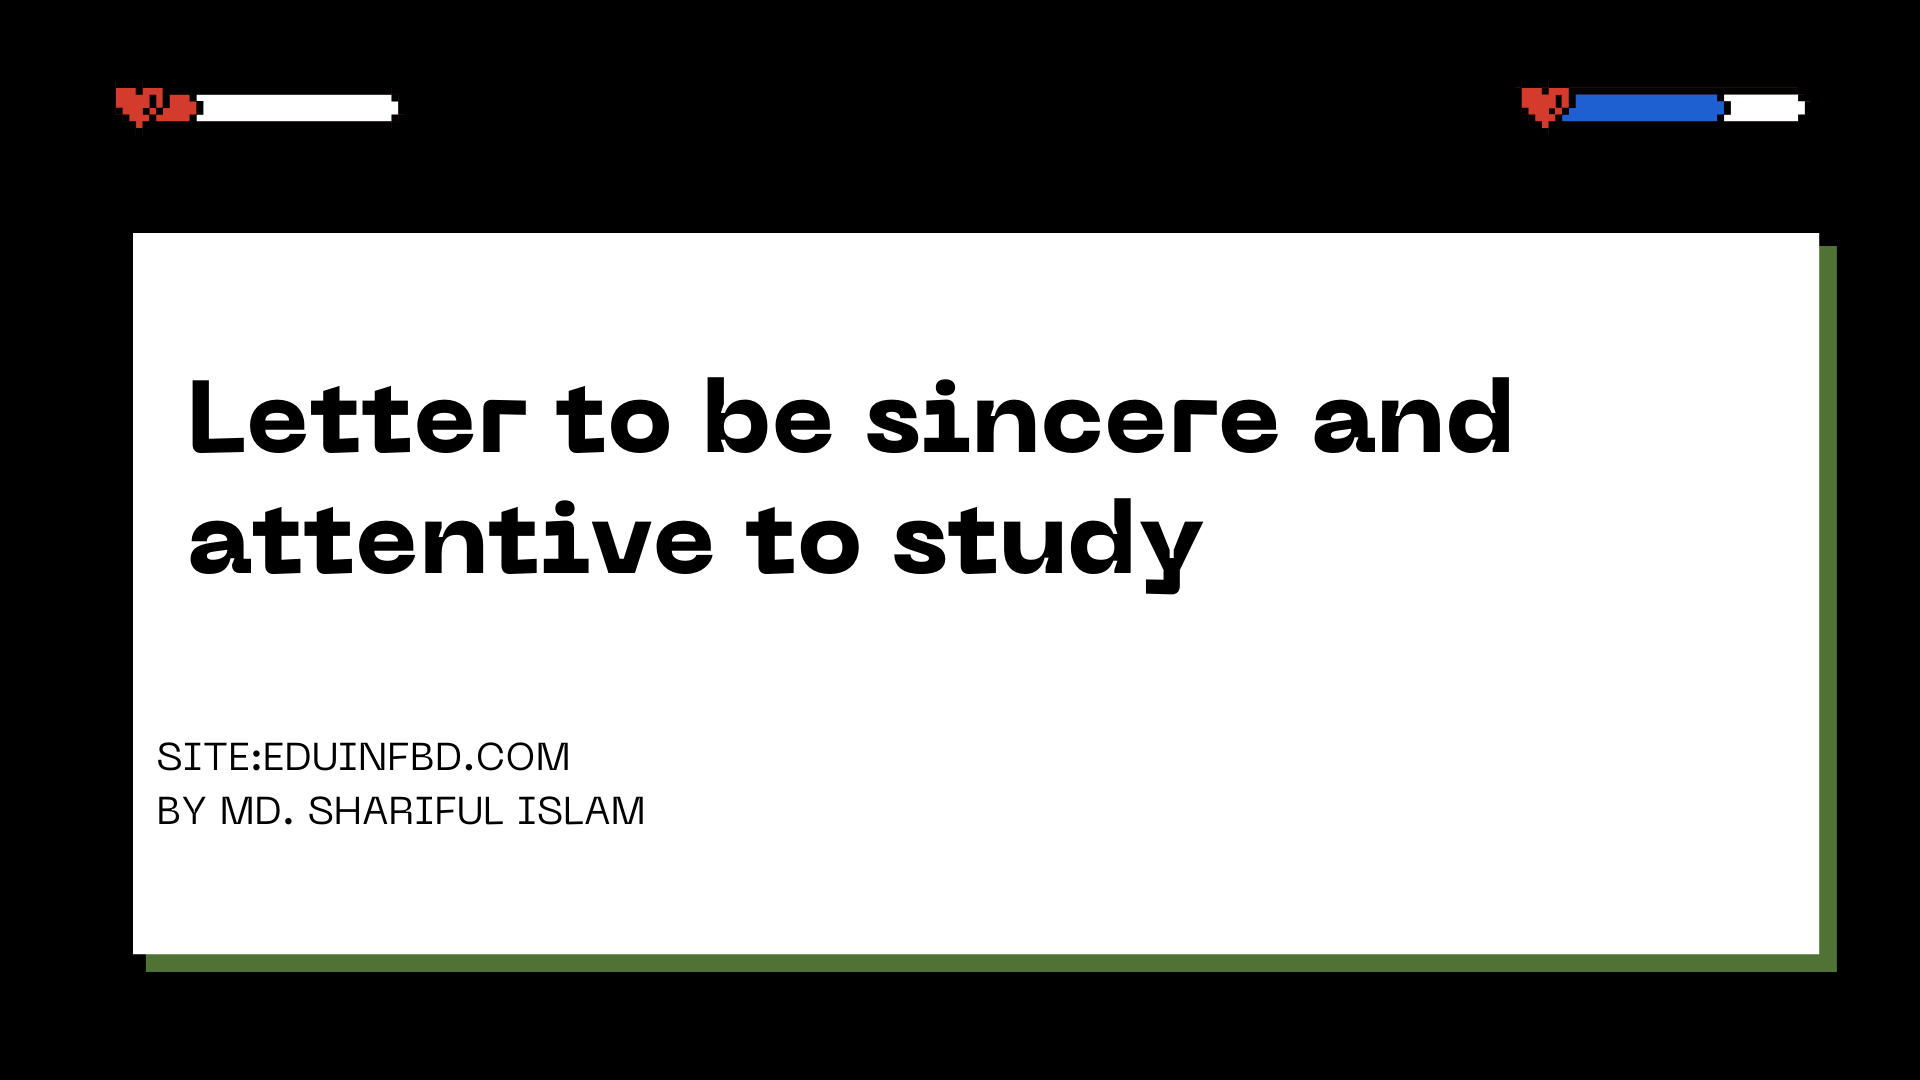 Letter to be sincere and attentive to study